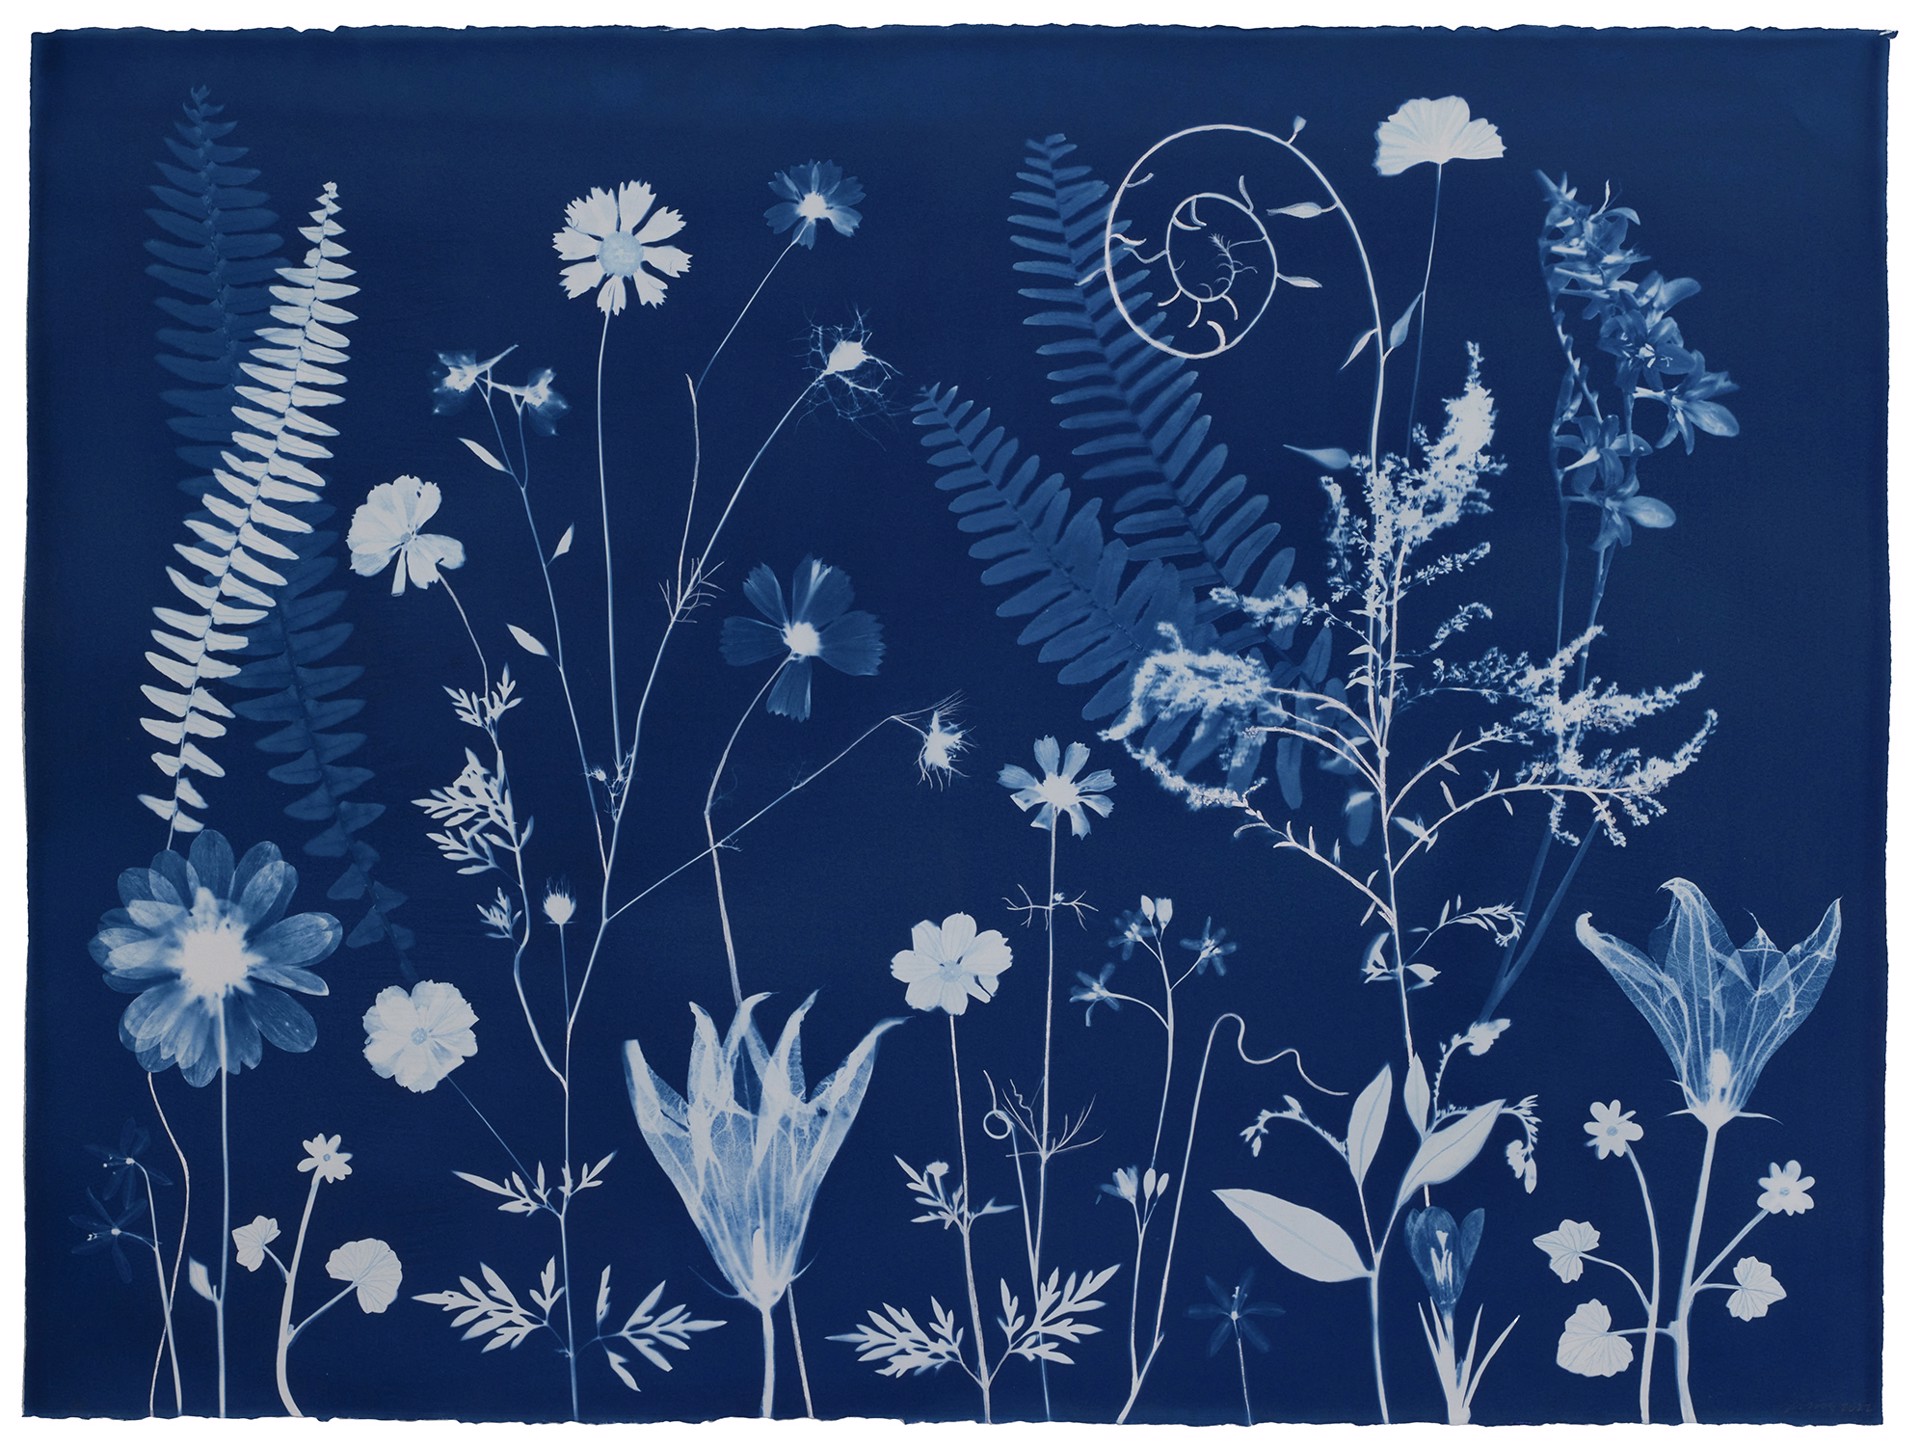 Nocturnal Nature (Squash Blossom, Fern, Cosmos, etc) by Julia Whitney Barnes